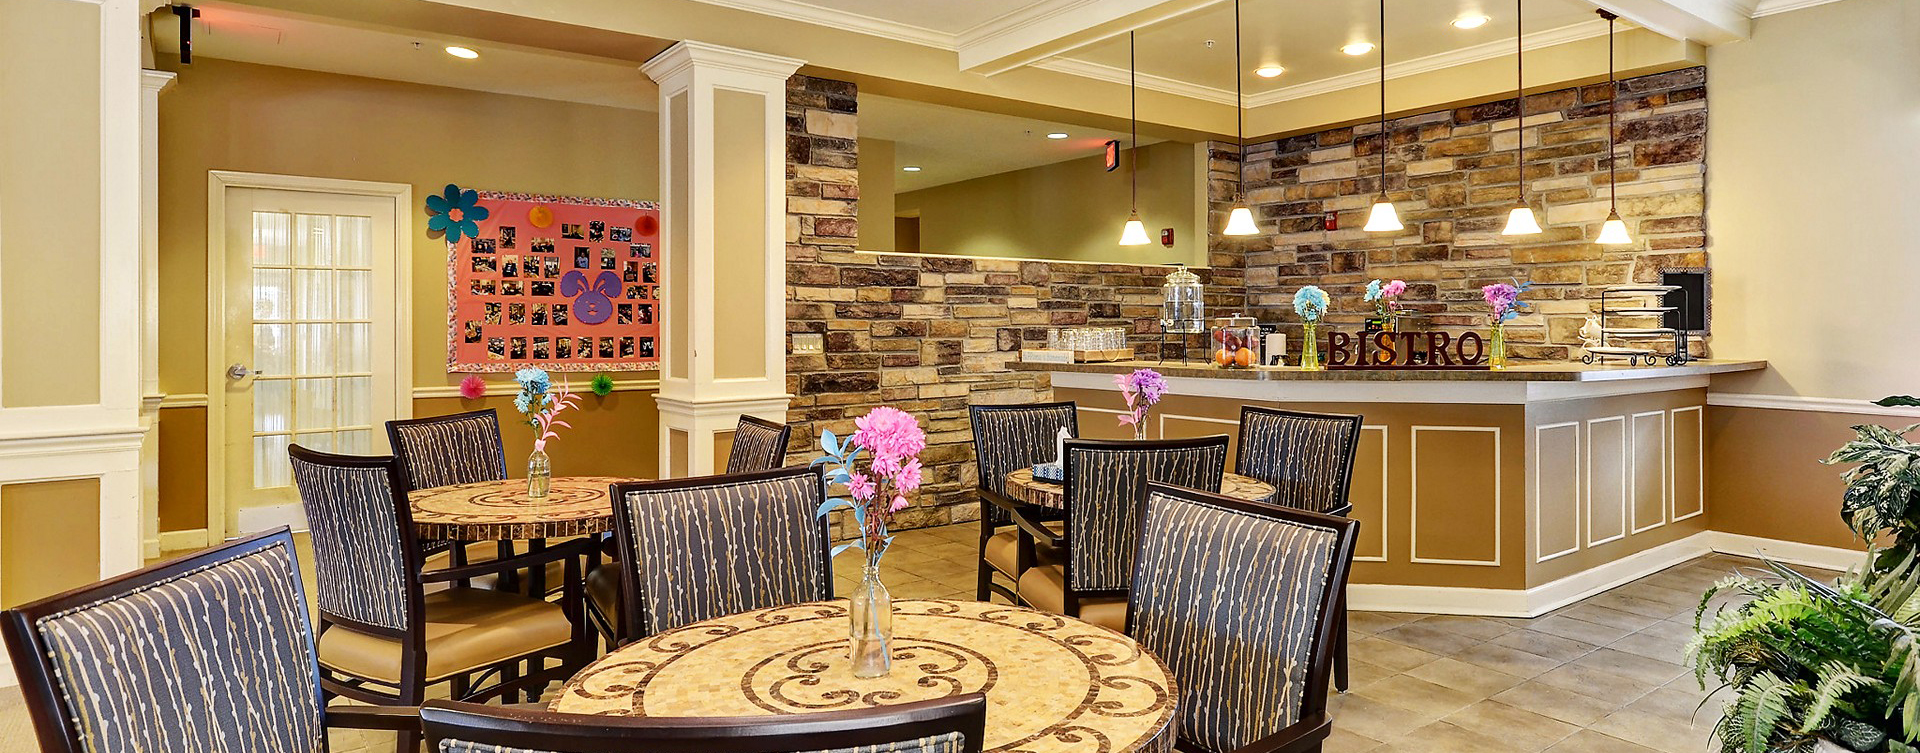 Intimate enough to entertain your closest family; you can even host your next get together in the bistro at Bickford of Crystal Lake